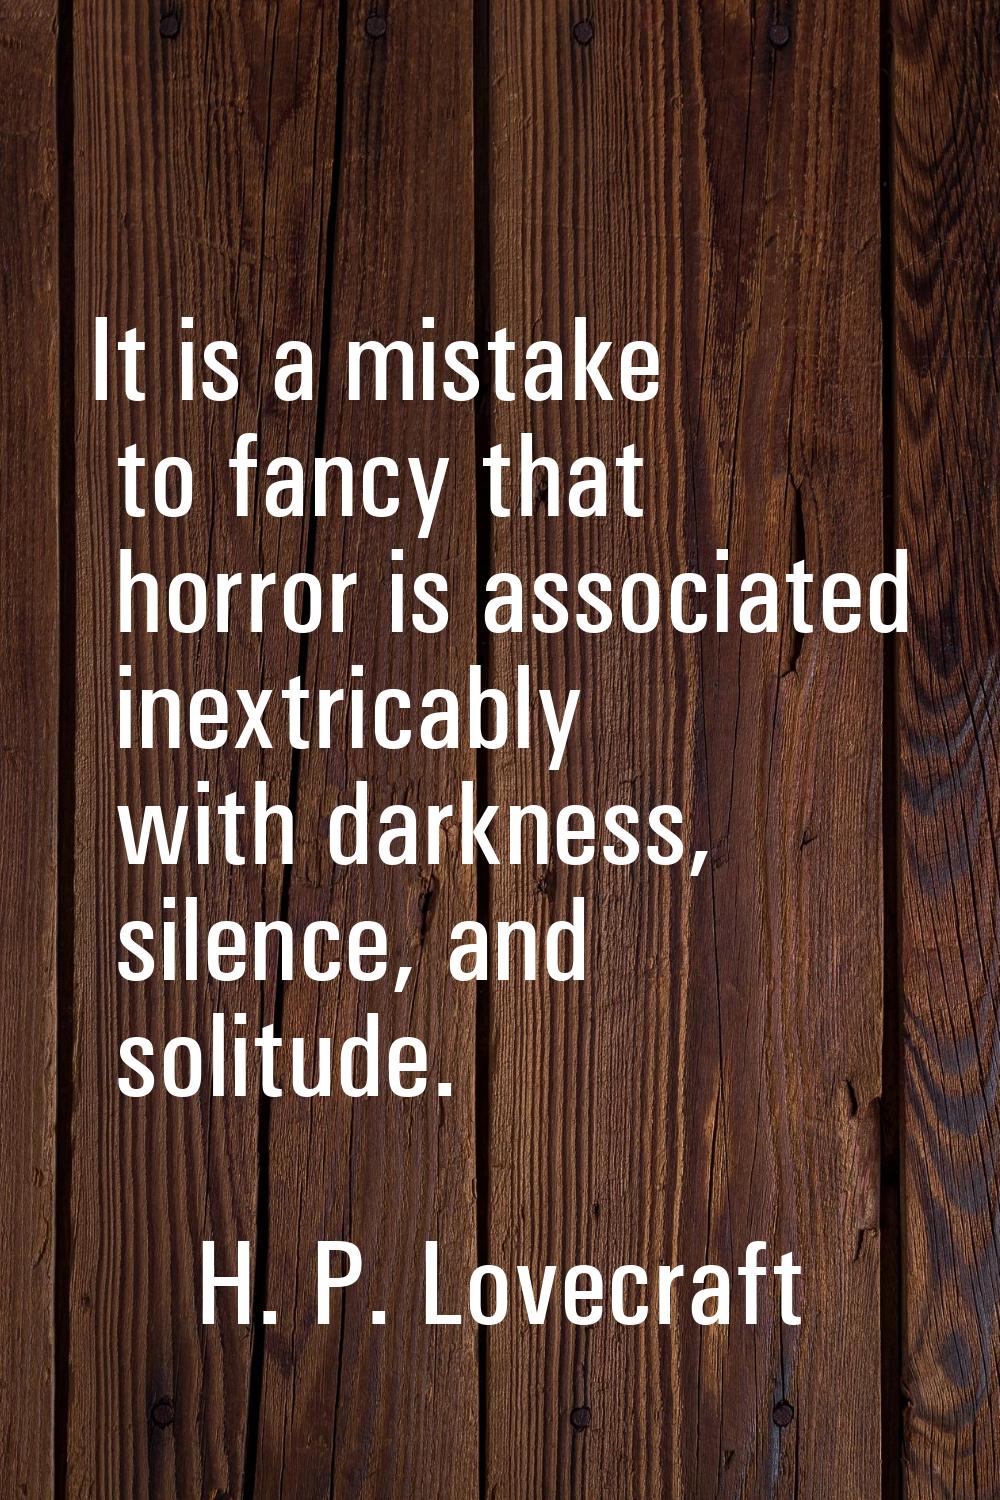 It is a mistake to fancy that horror is associated inextricably with darkness, silence, and solitud